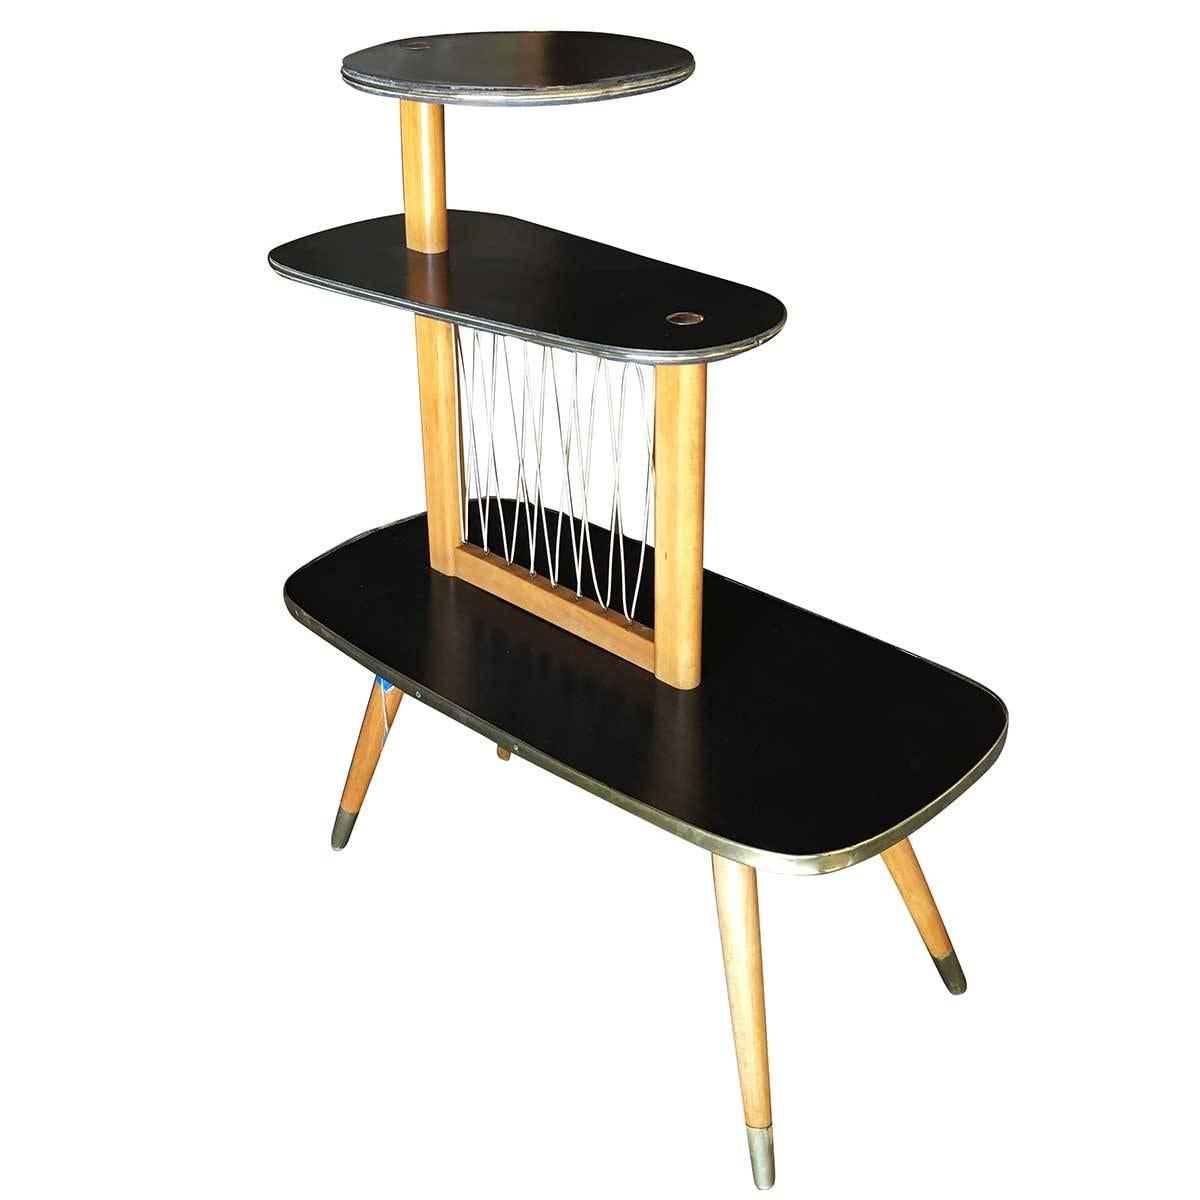 Set of two Mid-century side tables with string art center design featuring black Formica tops with brass trim and tapered legs.

There are two tall tables in this set. Made in France

Measures: Tall table H 33 in. x W 13.5 in. x D 27 in.
 